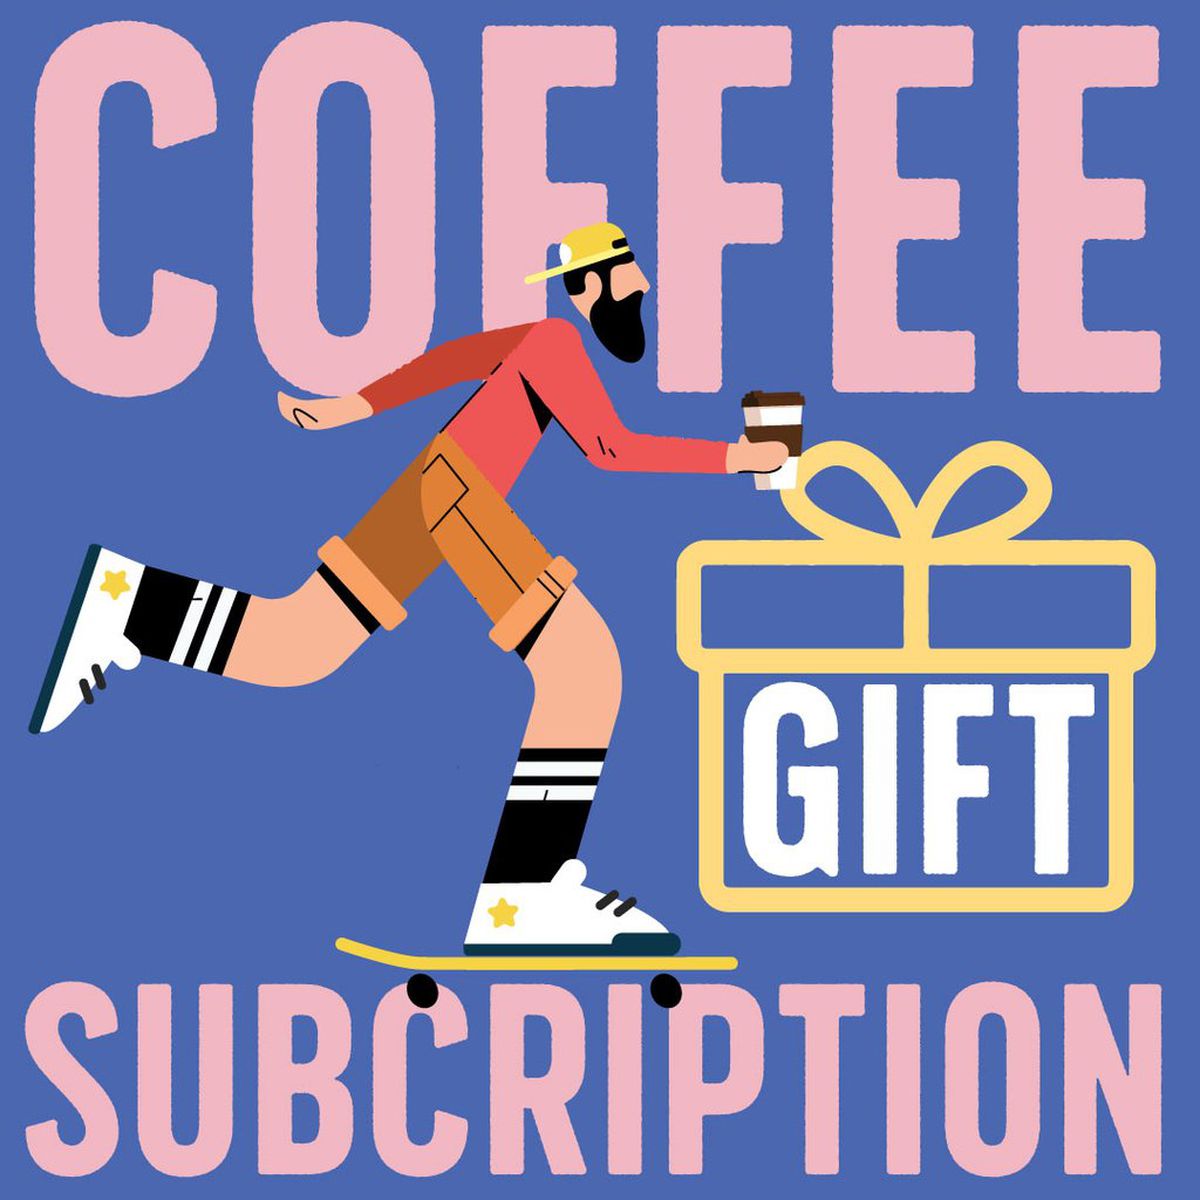 Cartoon of a running man touching a present. Text reads coffee gift subscription.